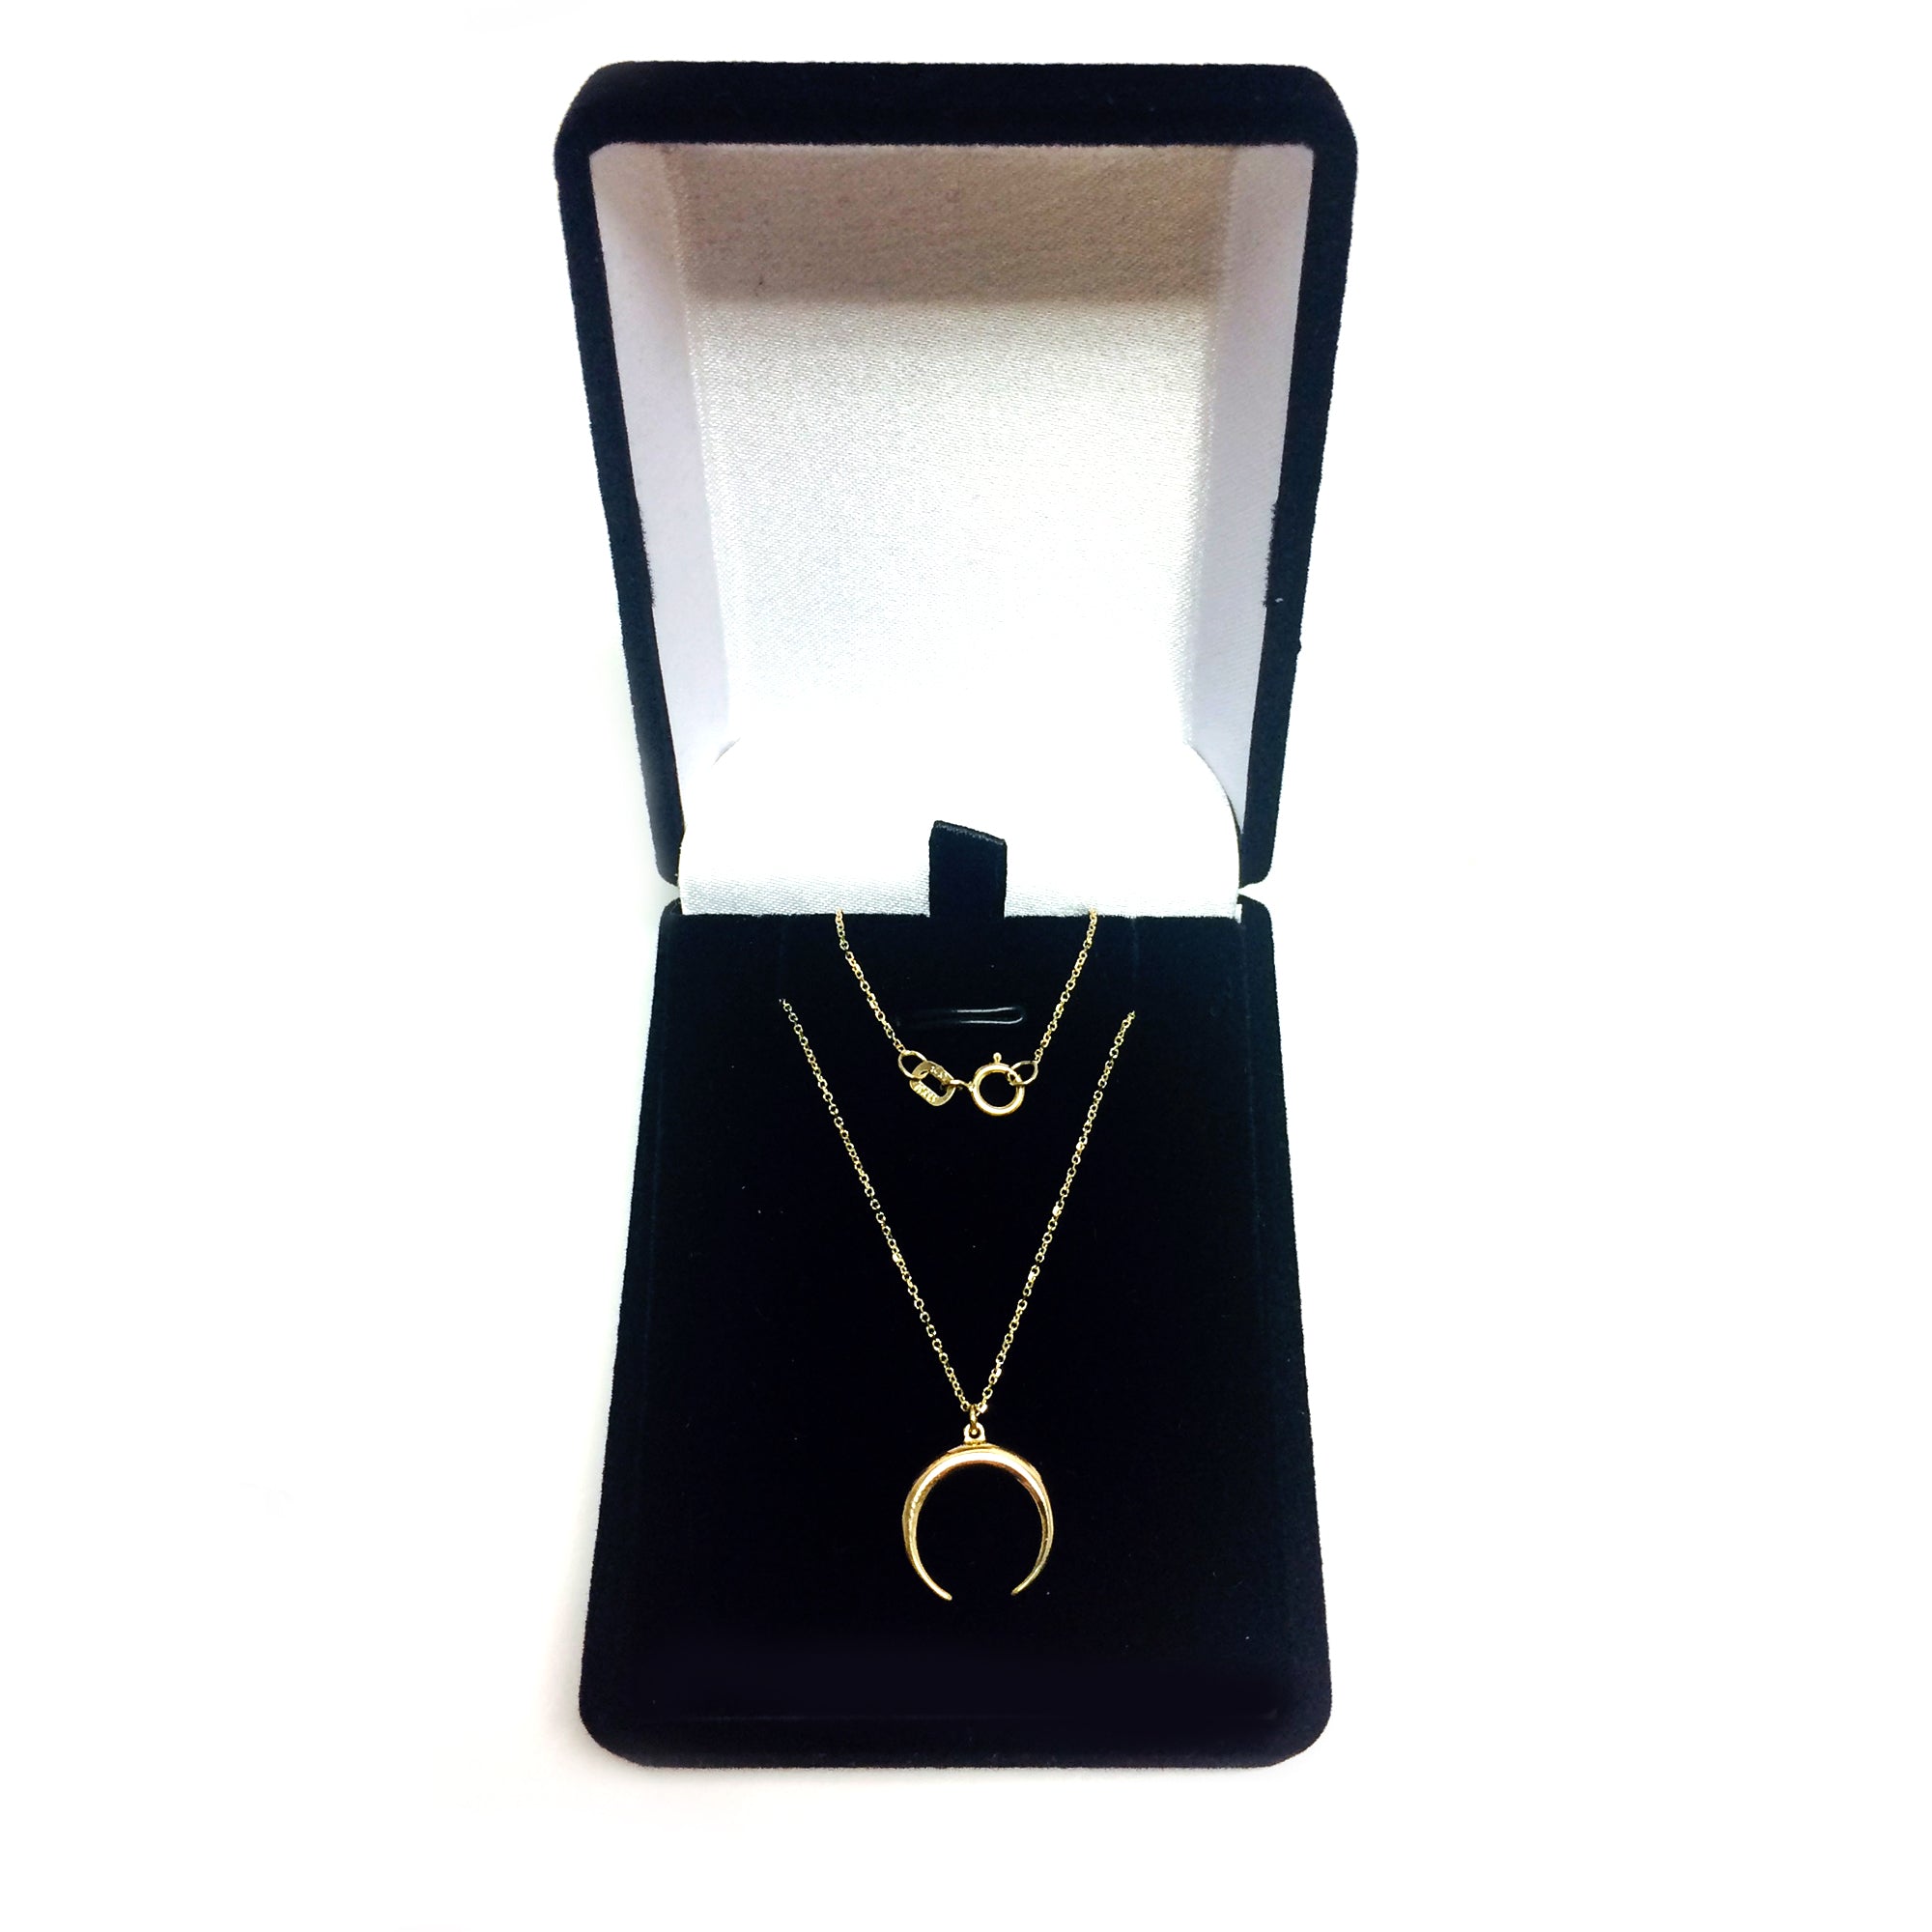 14K Gold Crescent Moon Pendant Necklace, 18" fine designer jewelry for men and women